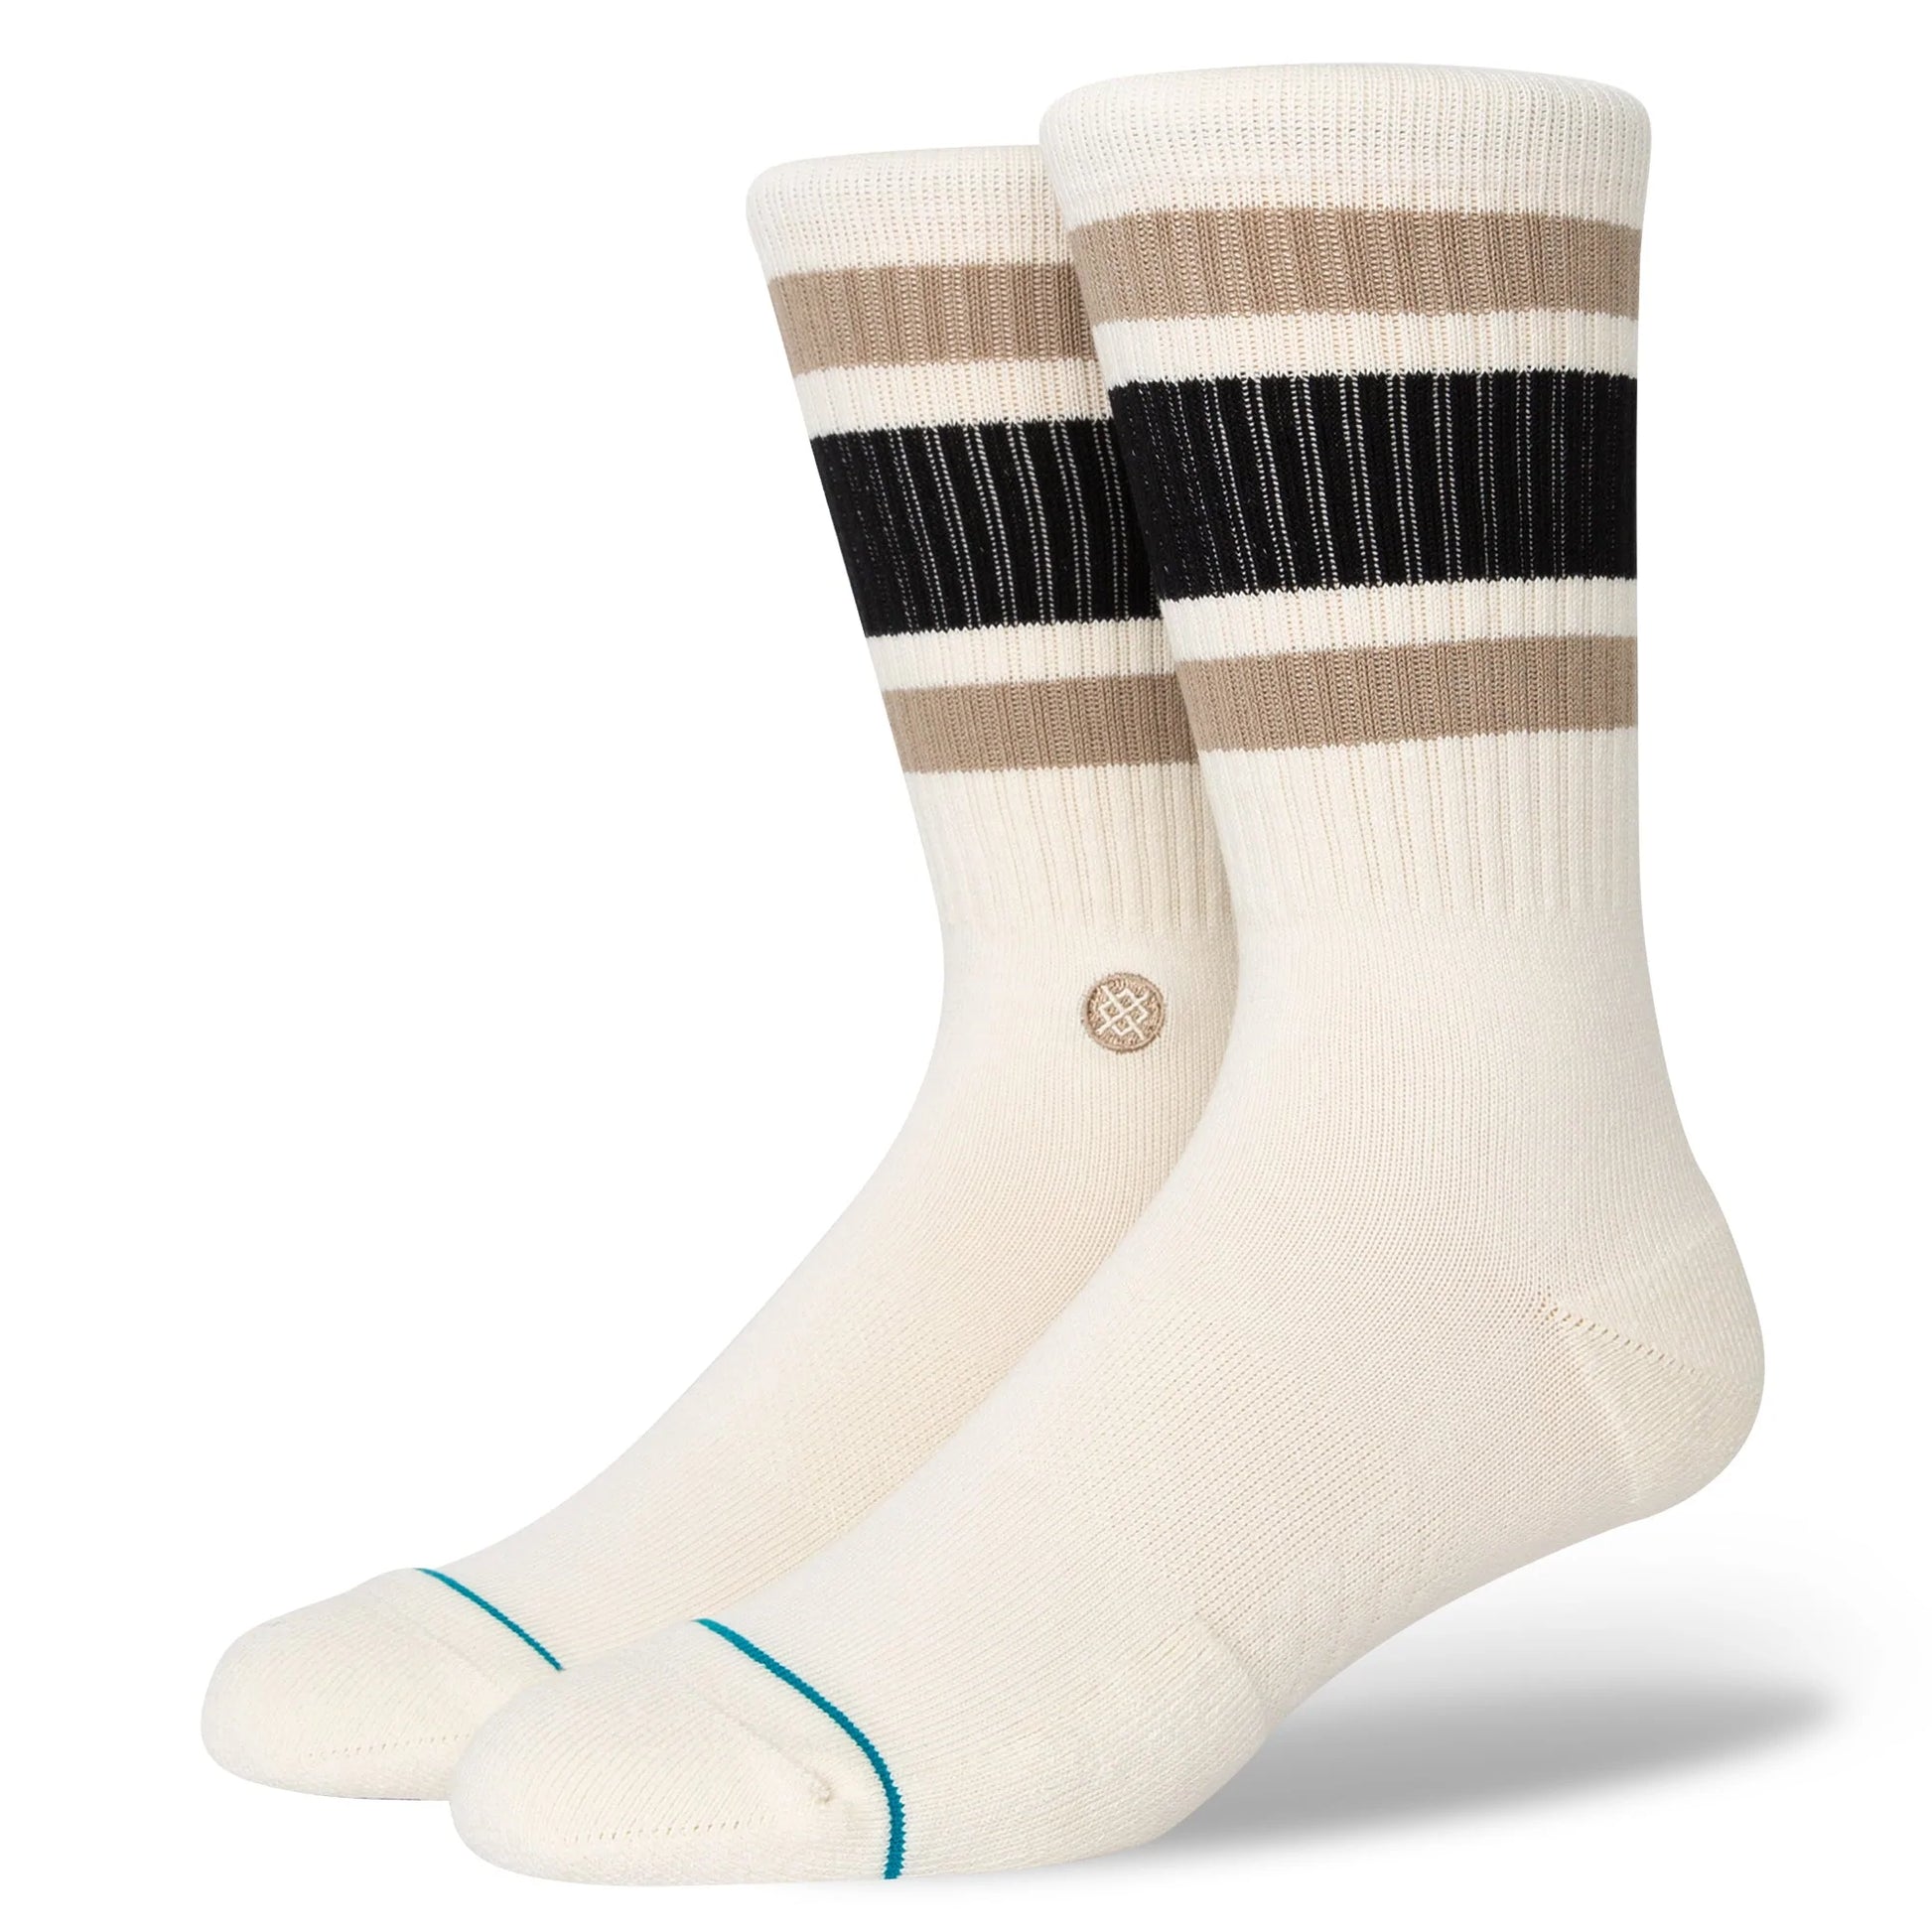 Contrast Clothing Worthing stance boyd crew socks taupe